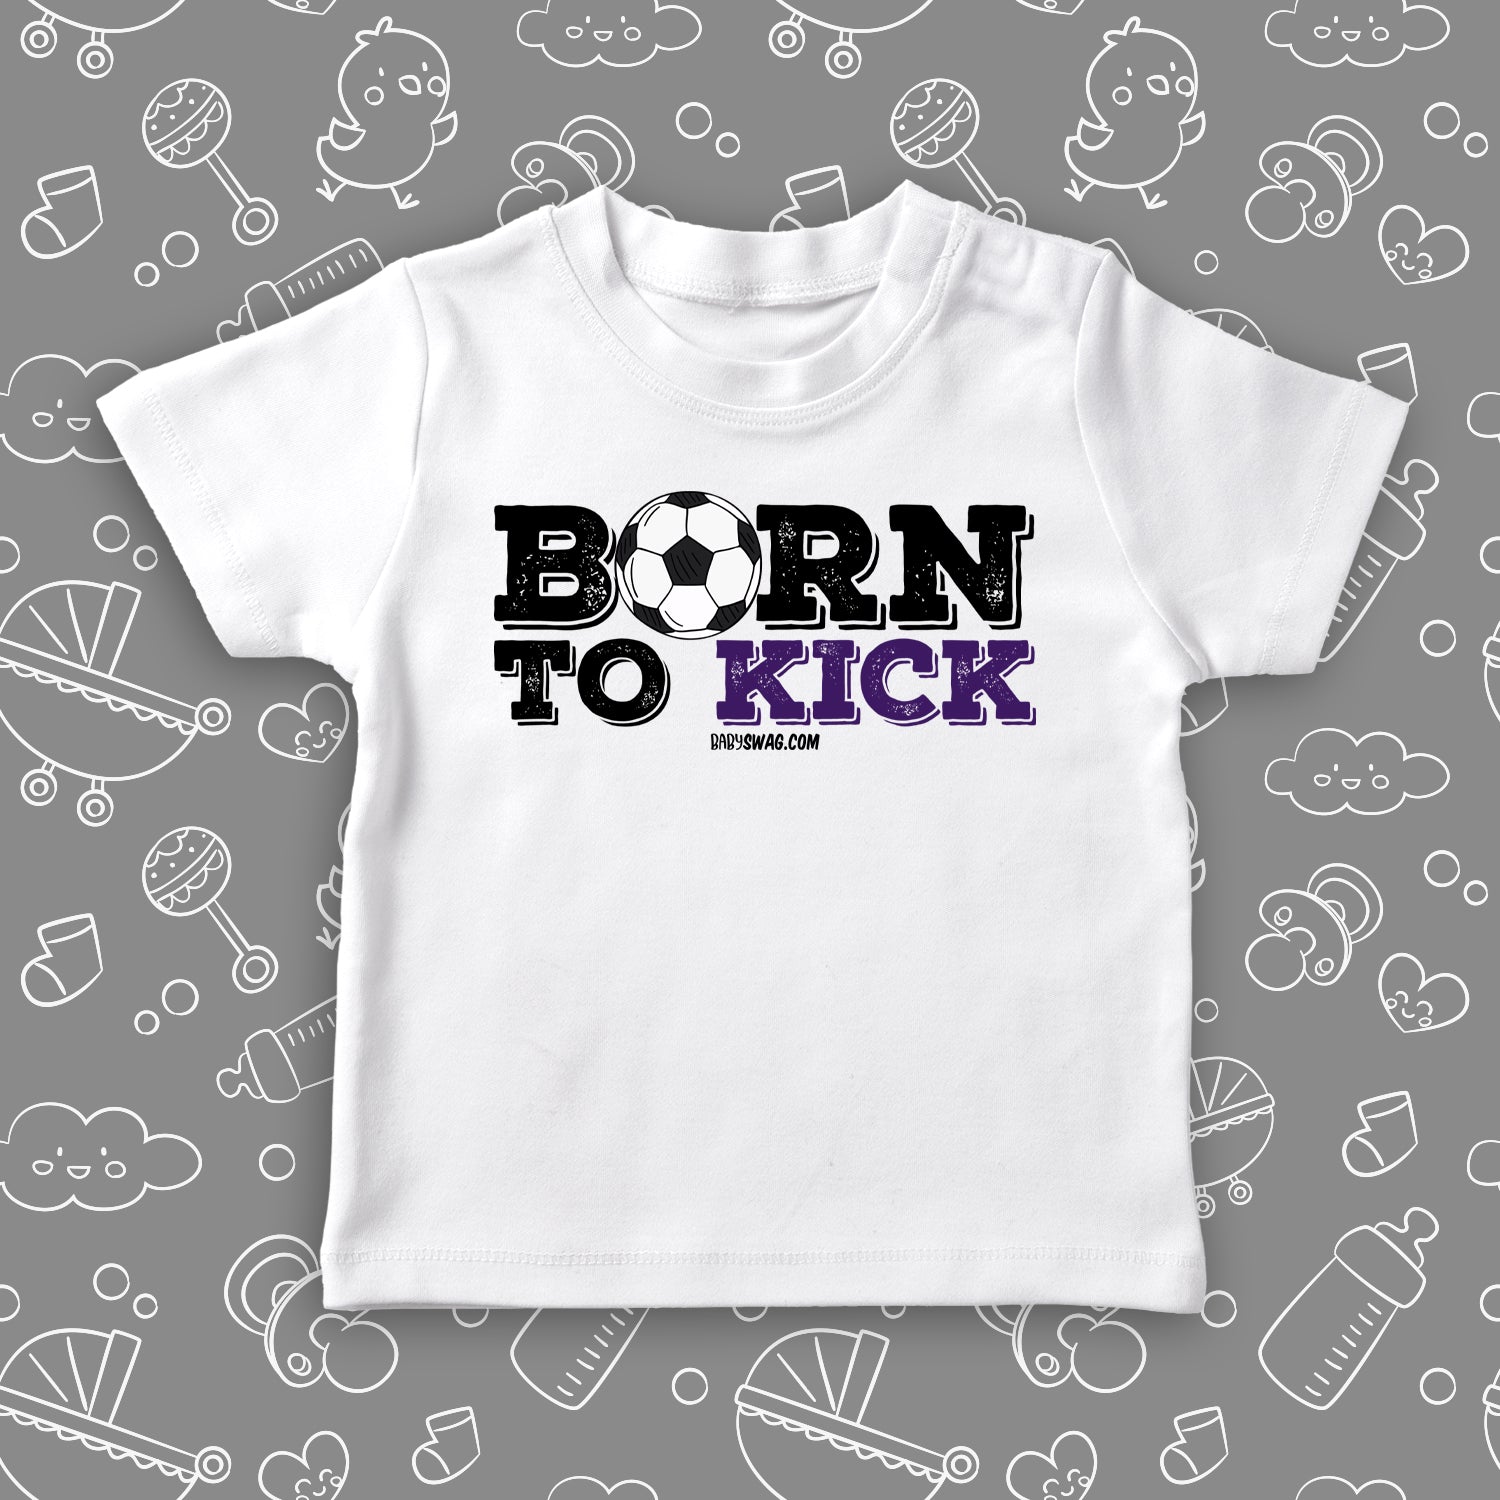 The "Born To Kick" toddler boy shirt in white with soccer ball print.